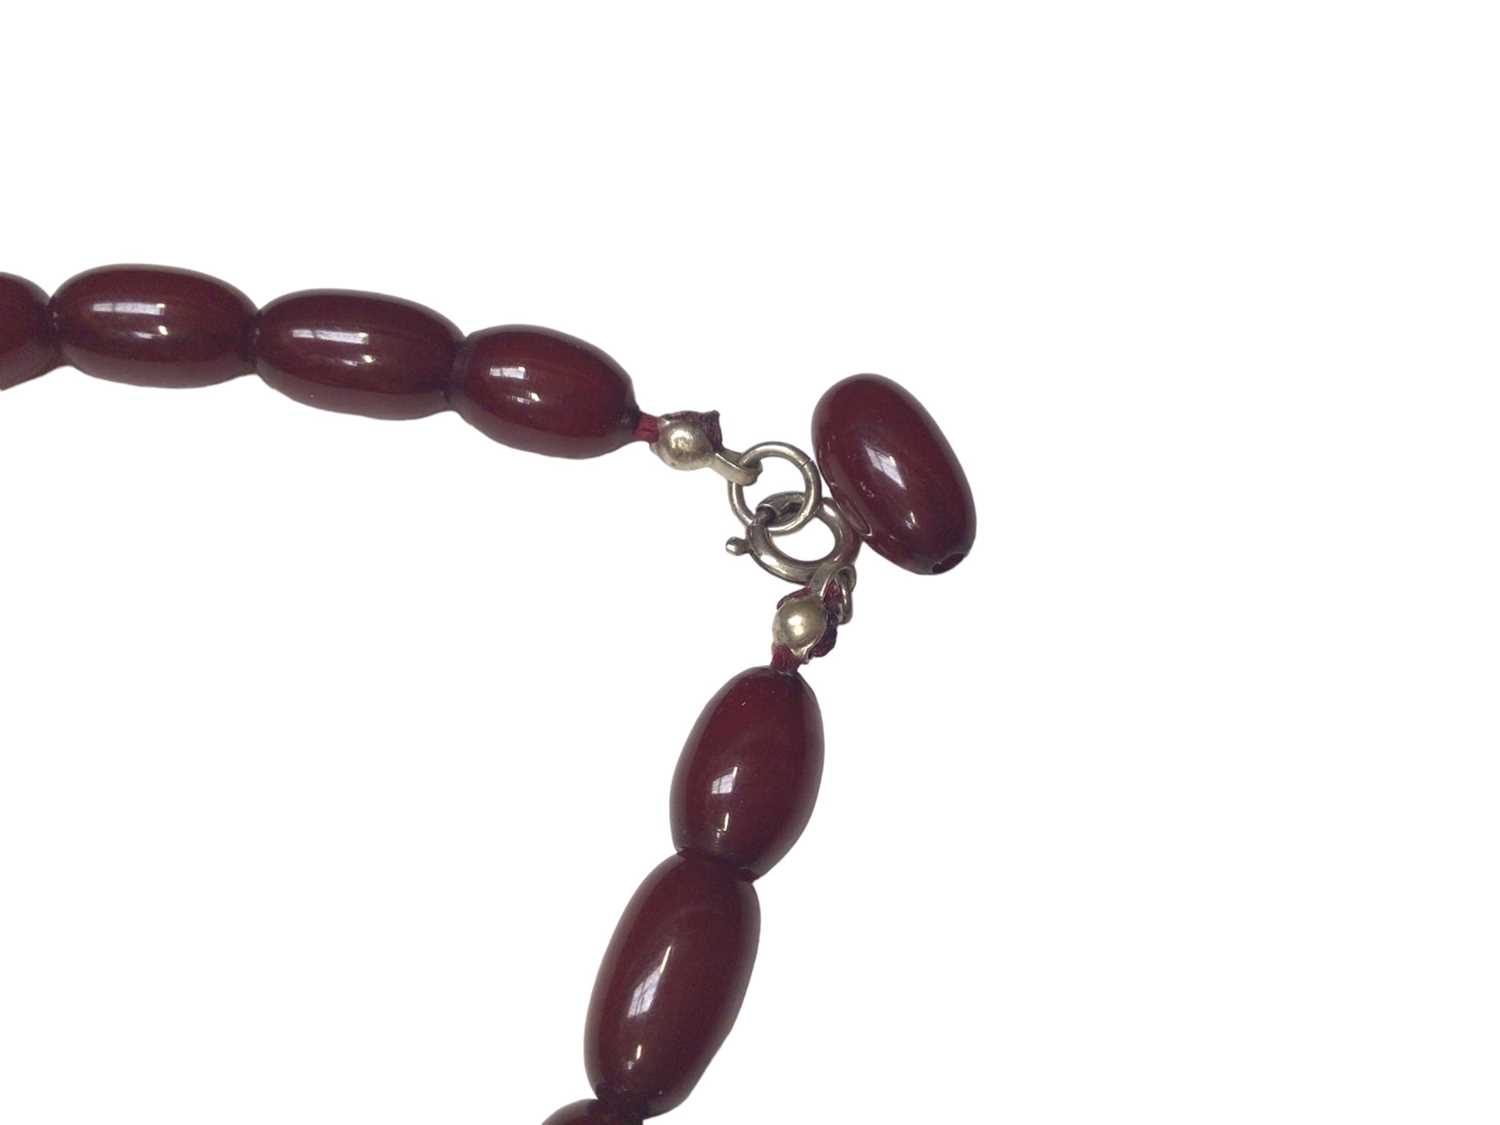 Simulated cherry amber graduated oval bead necklace - Image 3 of 7